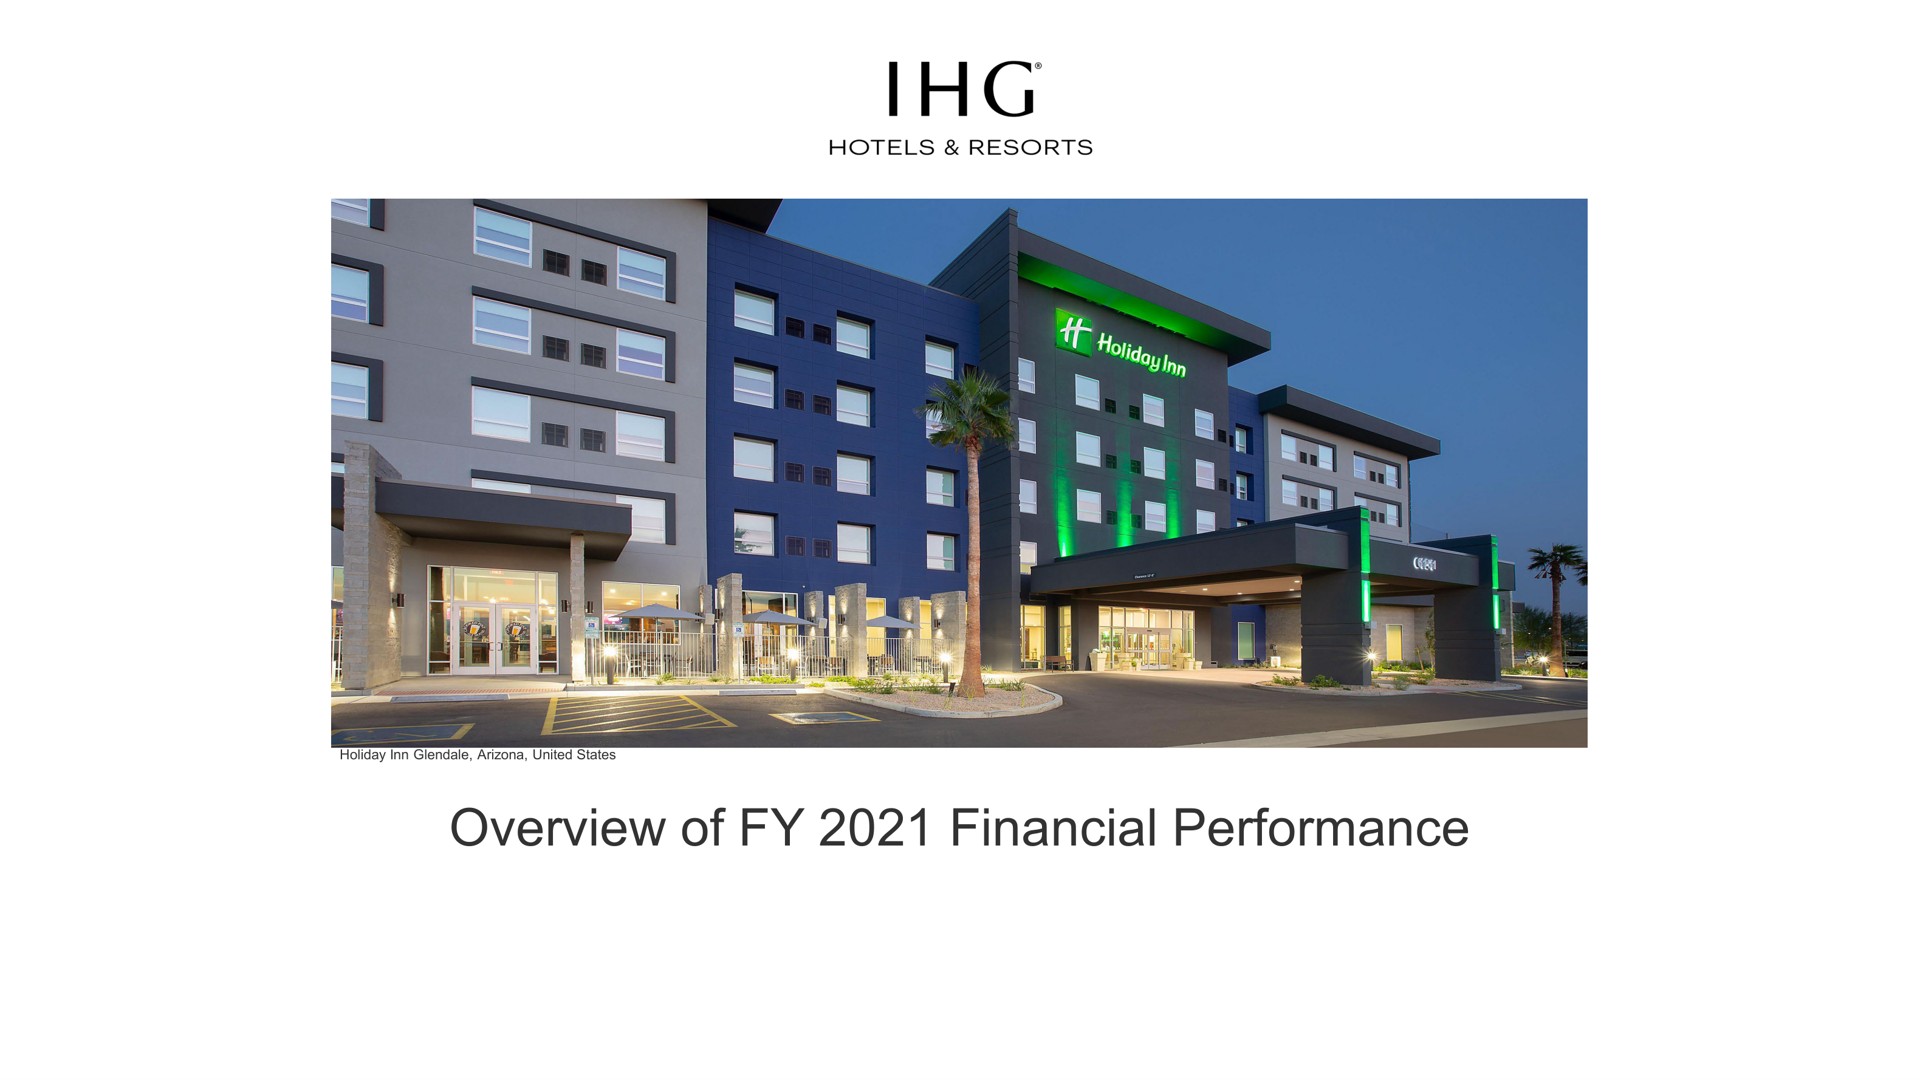 overview of financial performance | IHG Hotels